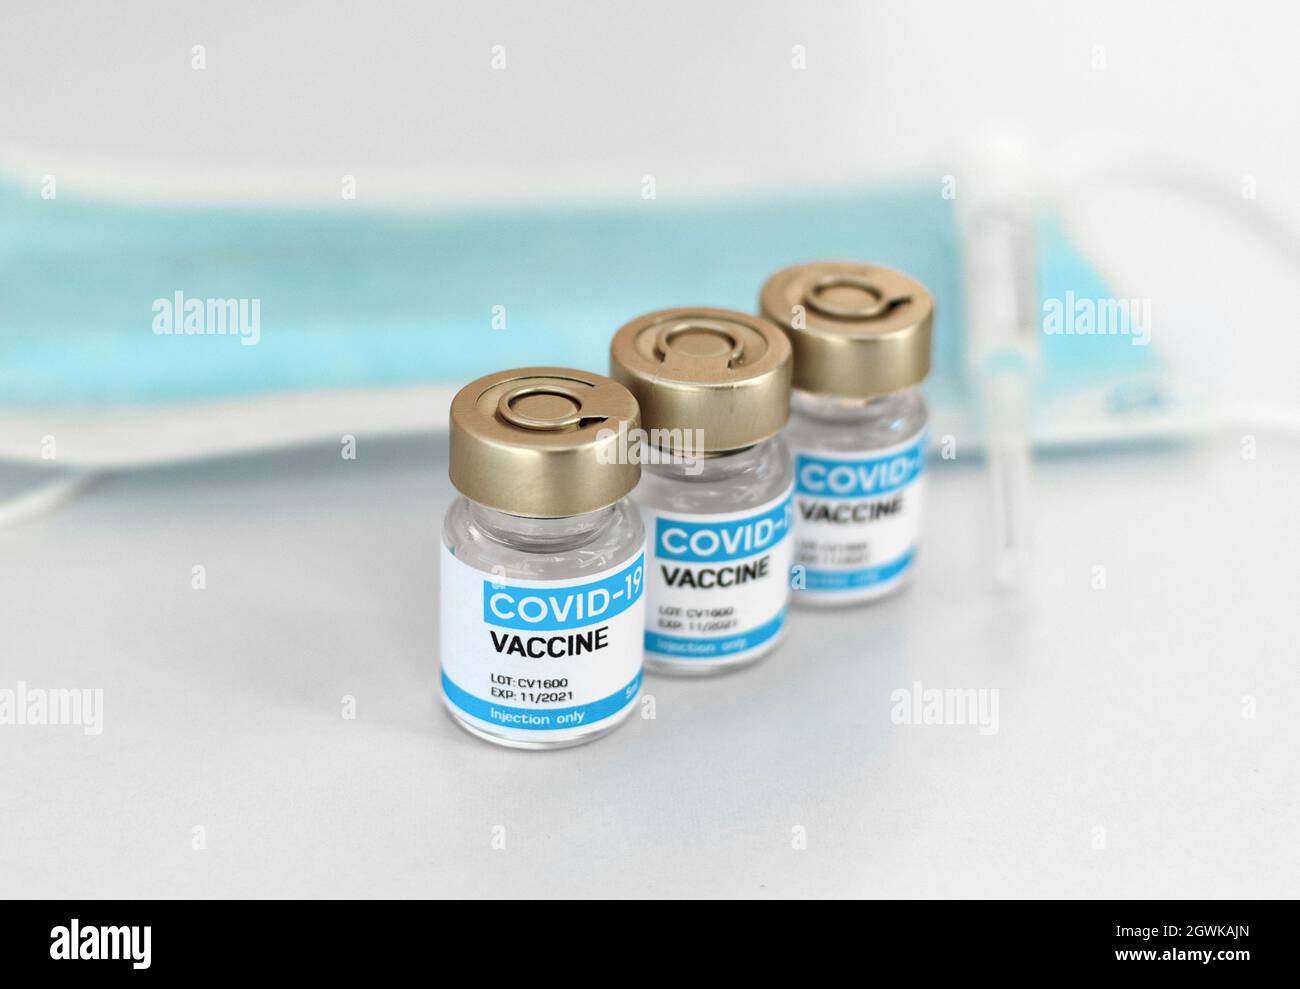 Close-up Image Of Covid Vaccines And Syringe On White Background. Stock Photo